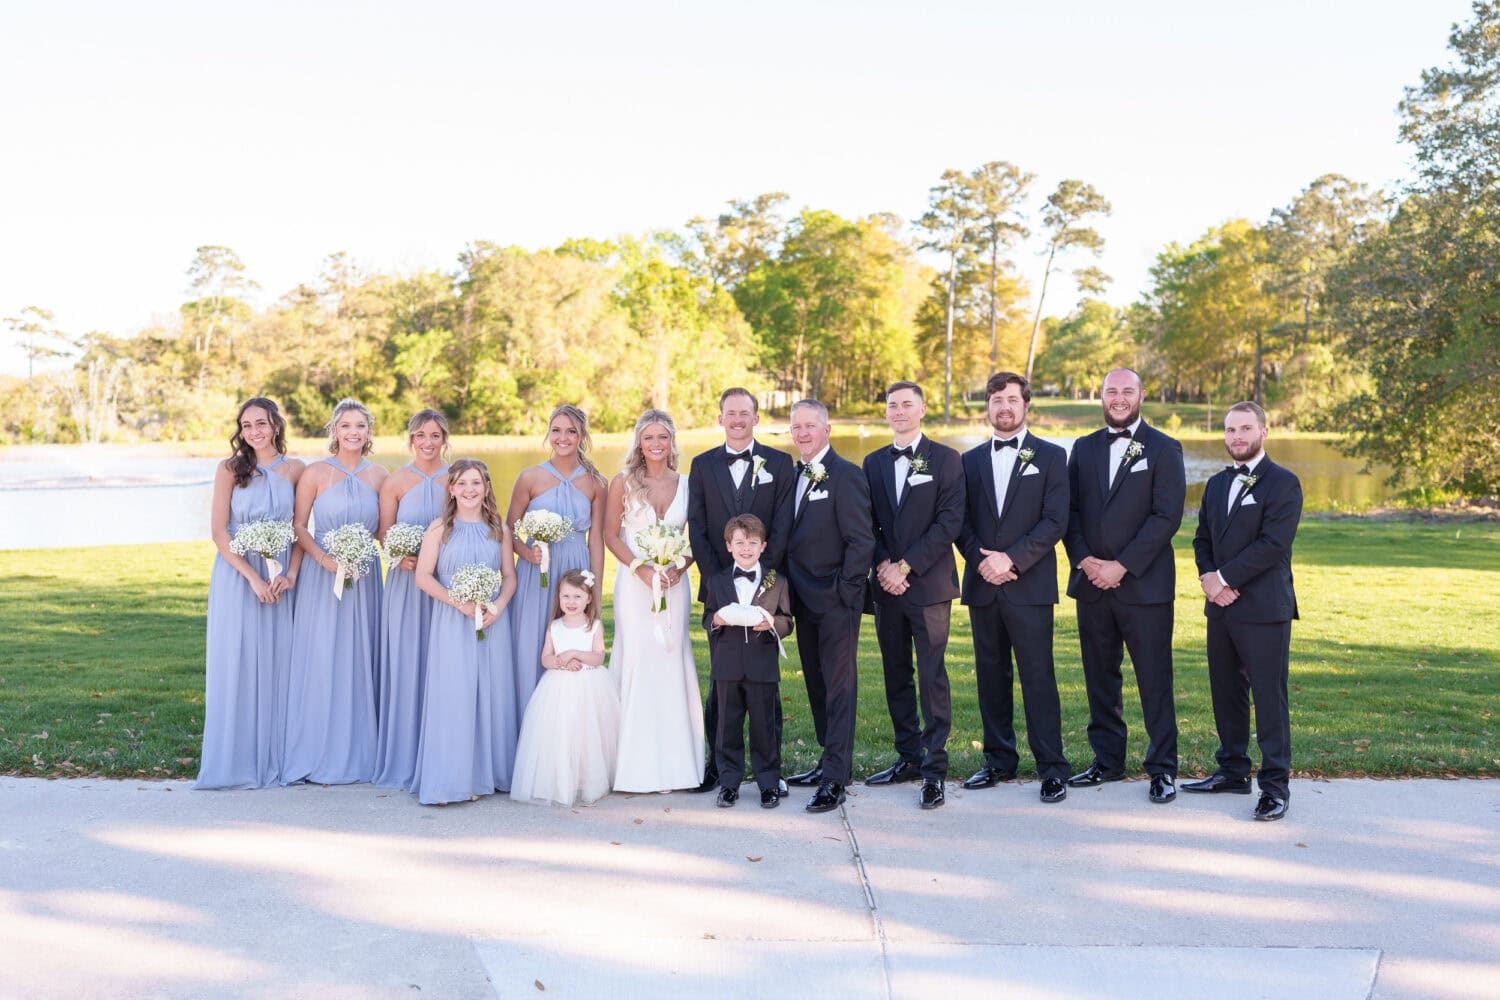 Wedding party in the shade by the lake - Pawleys Plantation